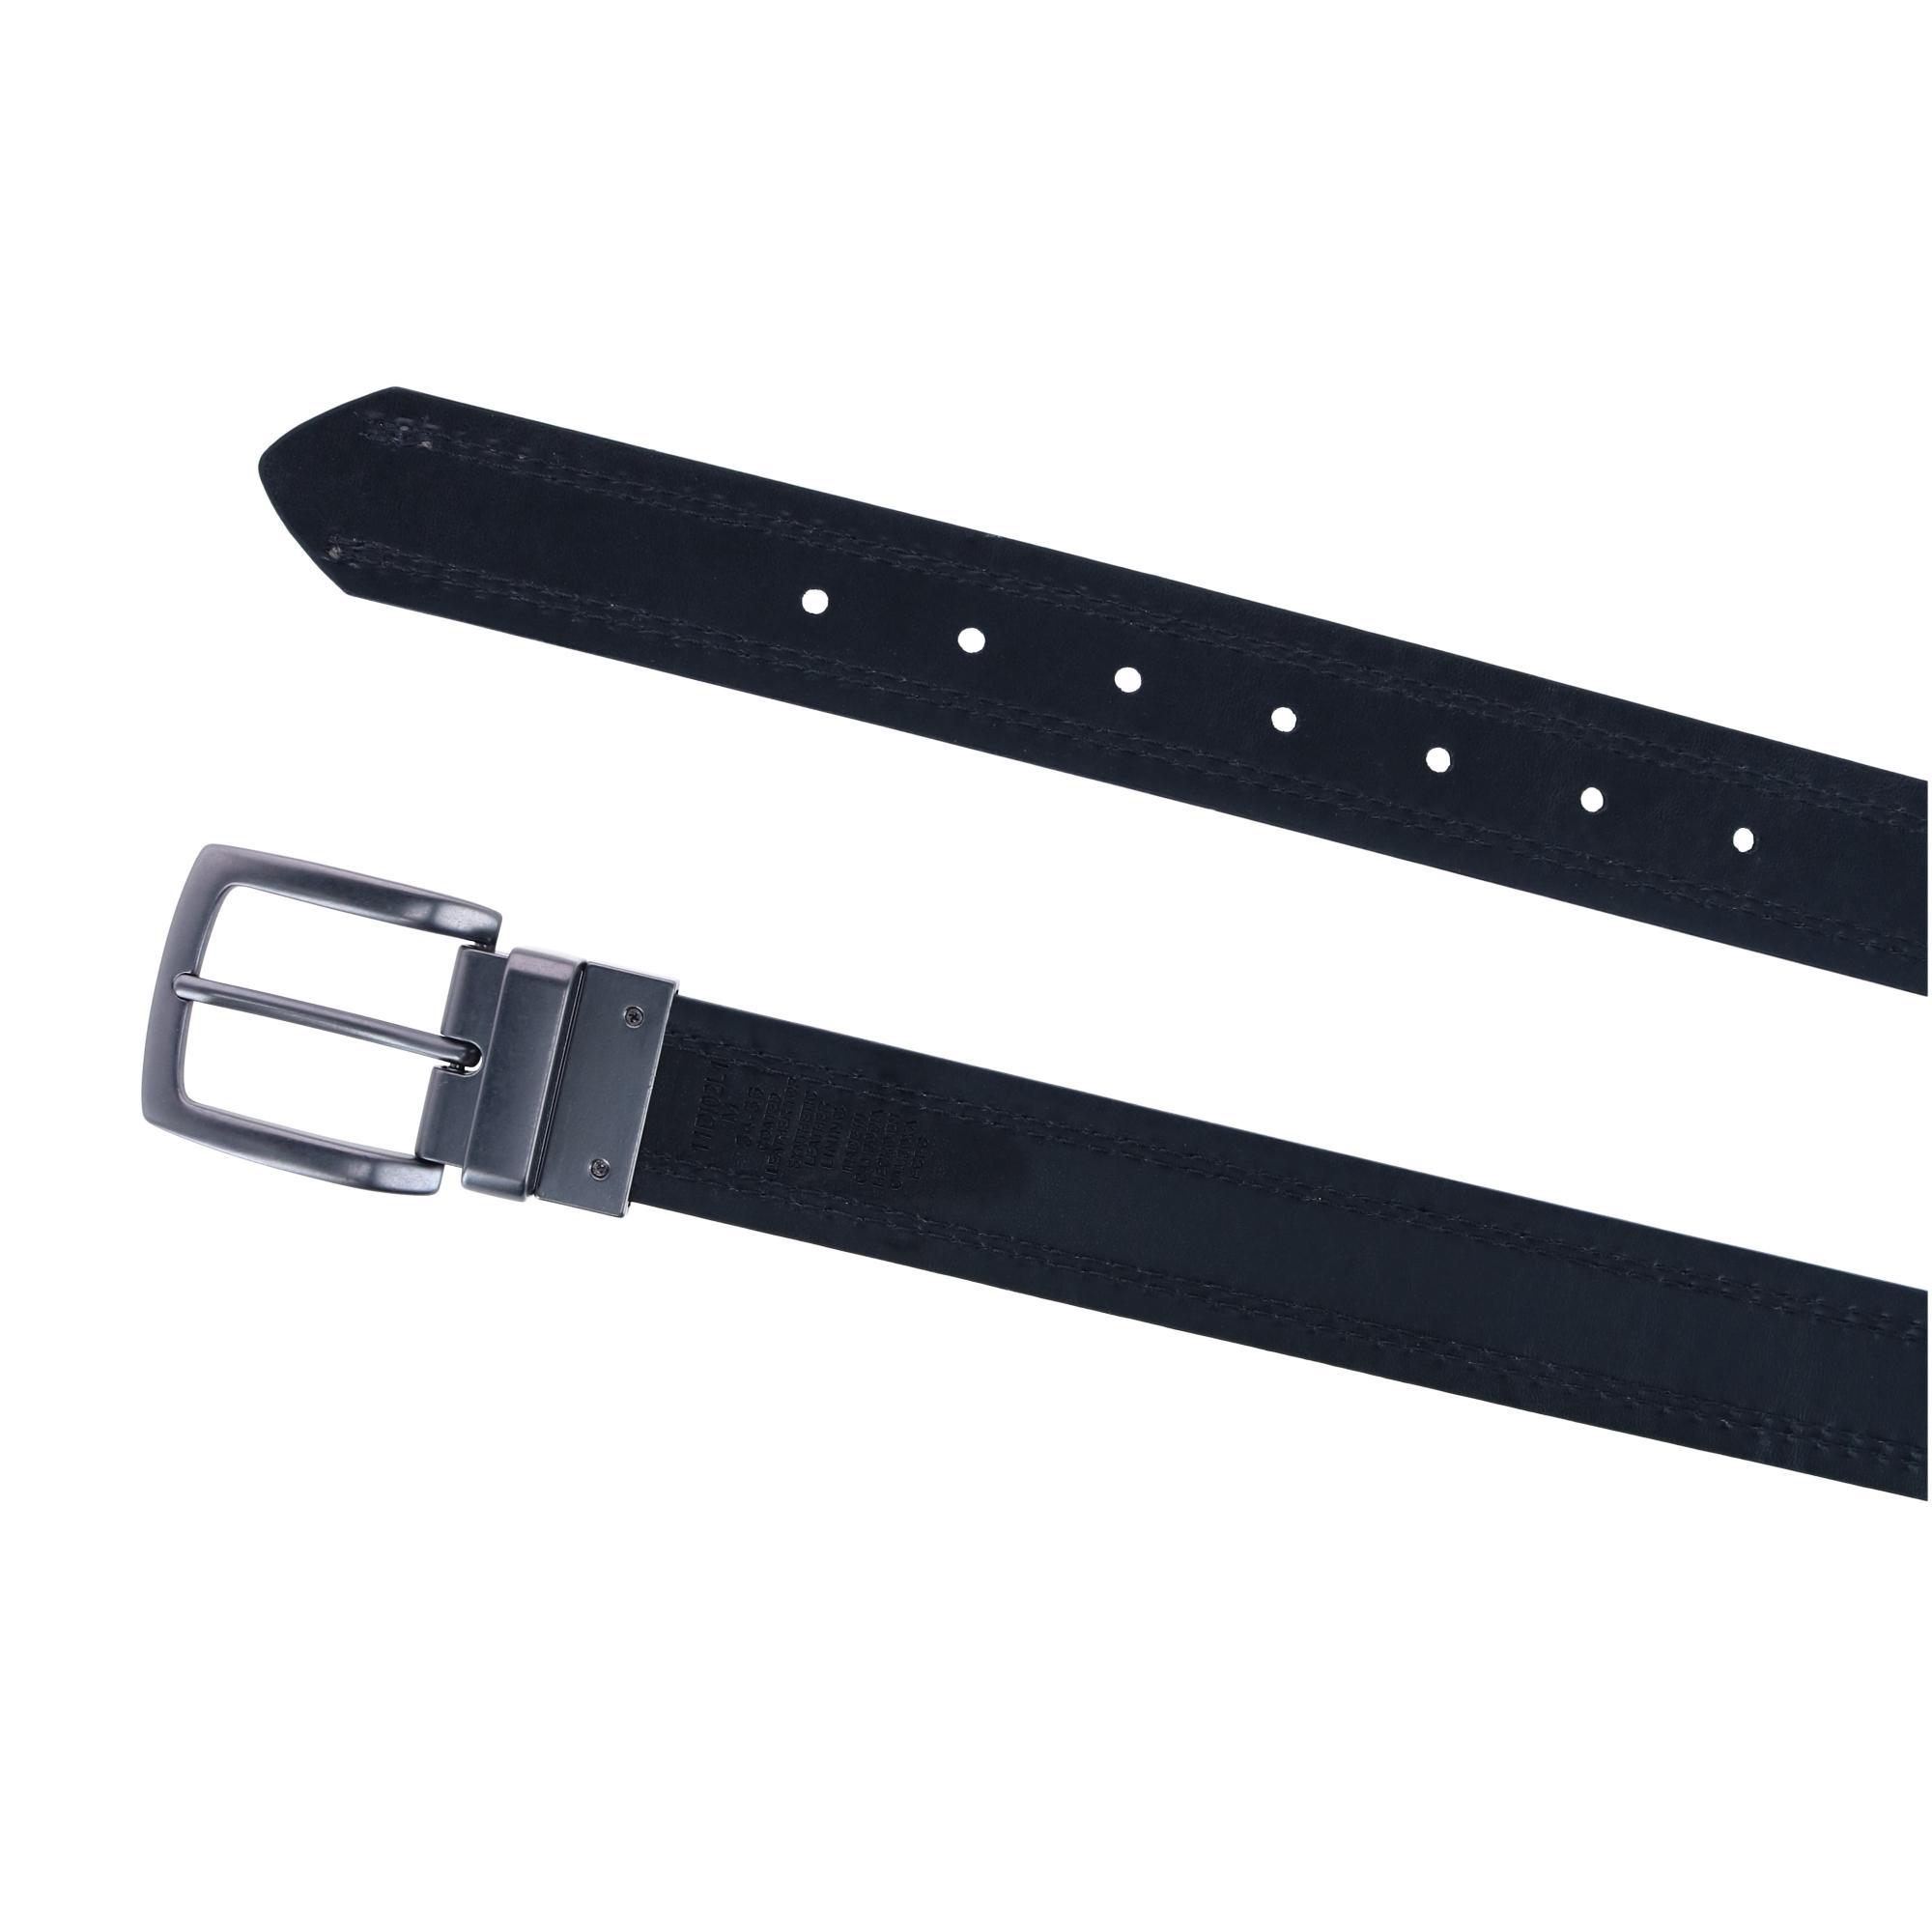 Dickies Men's Reversible Belt with Contrast Stitch